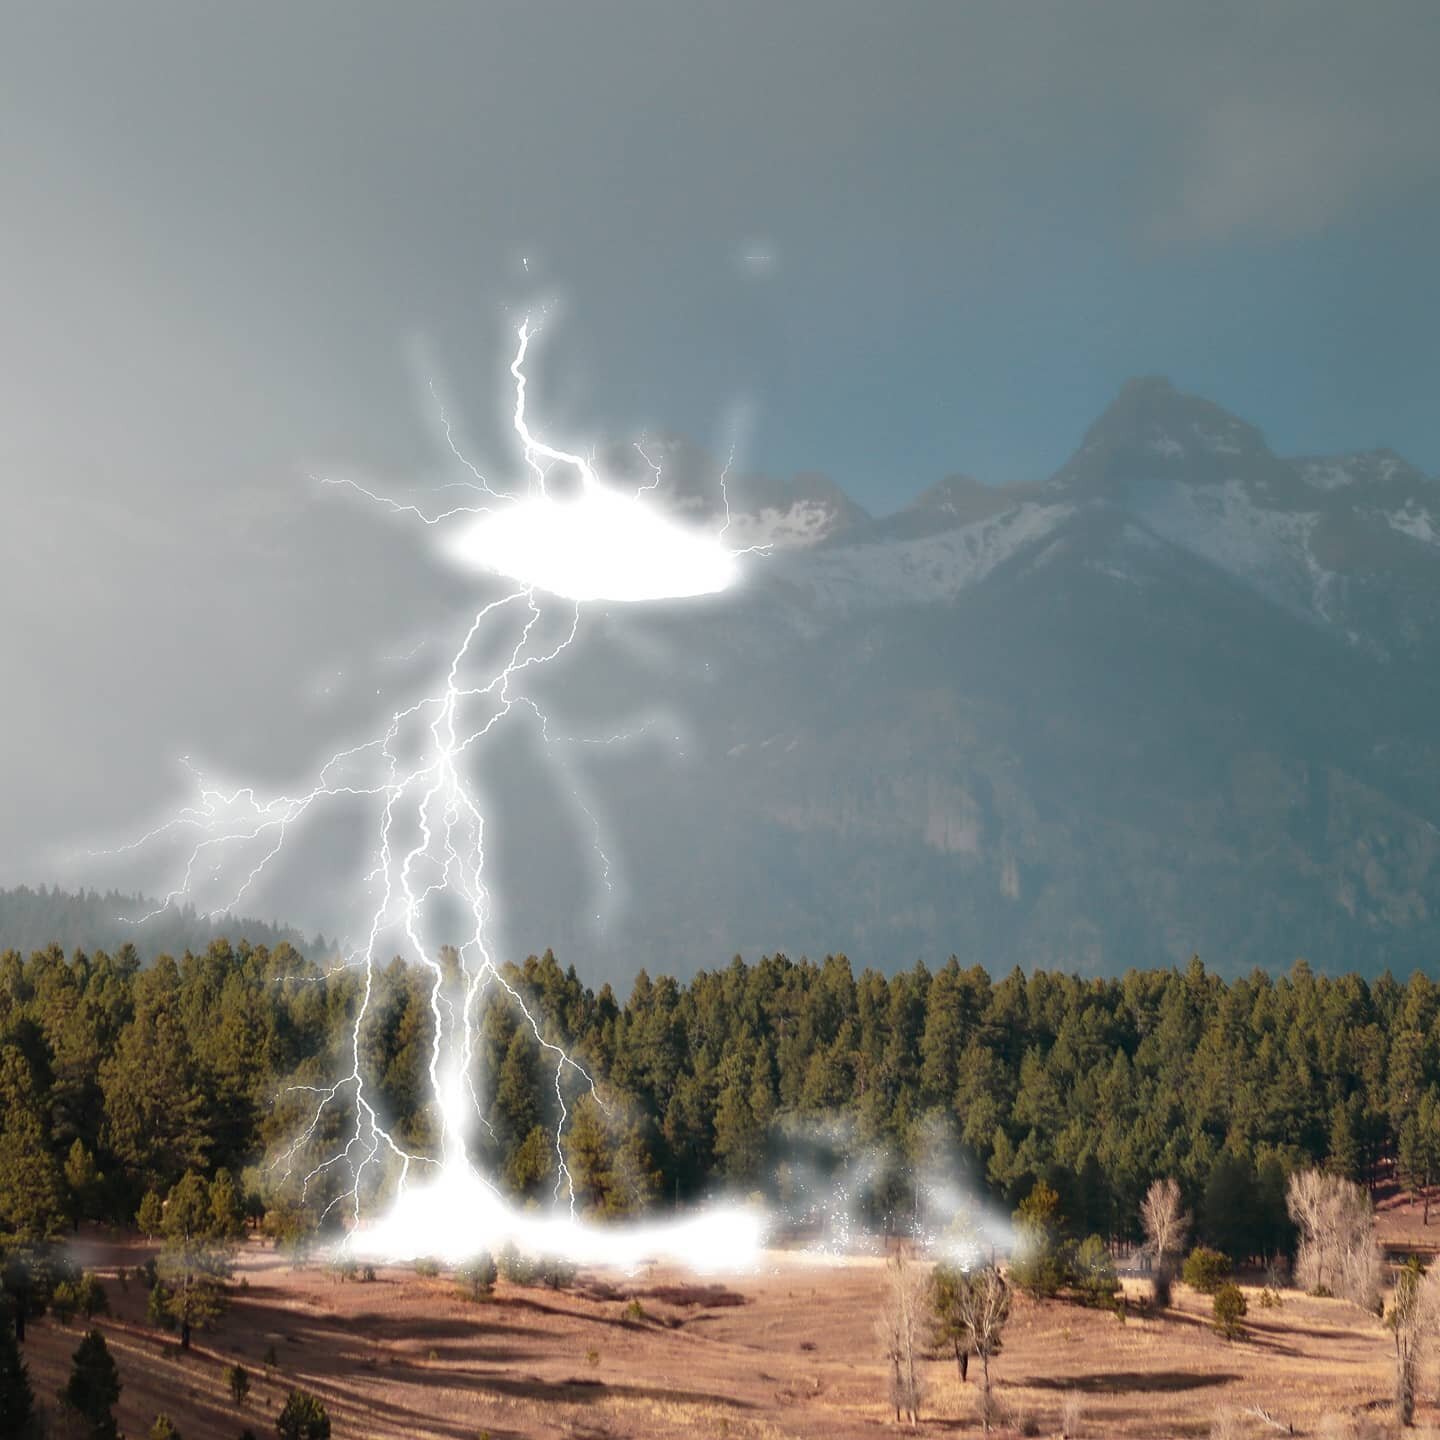 Lightening Lightning (it will hit you at some point in this life) allows us to vibrate at a higher frequency. Higher frequencies are aligned with unique thought, beings, and music.

As we embrace the heating up of our Consciousness to be like a bolt 